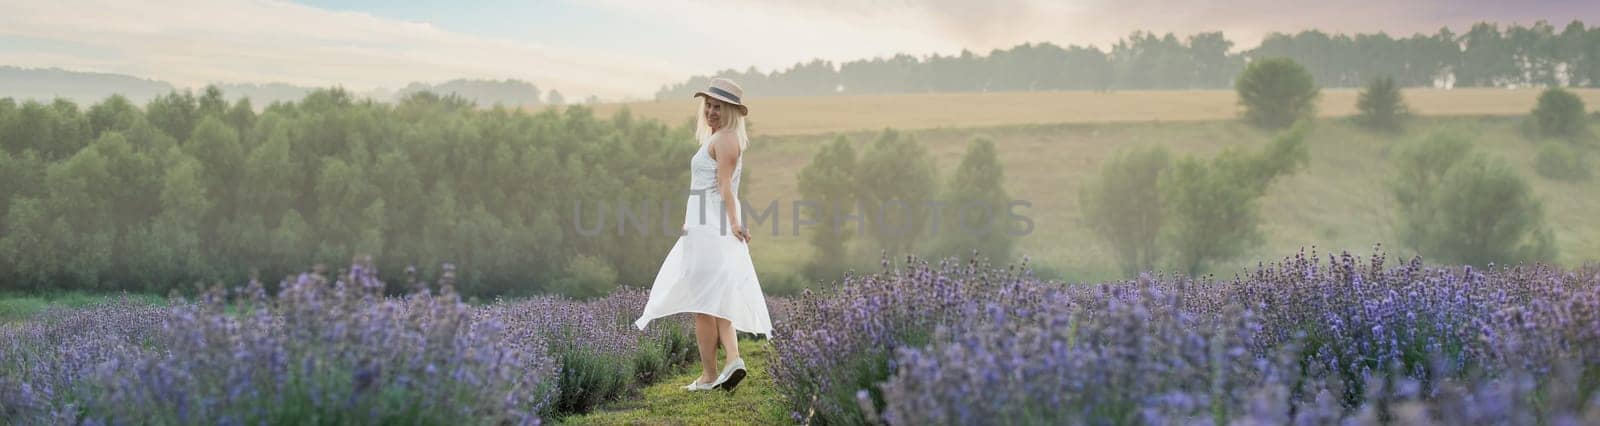 Beautiful young woman in wicker hat and white dress in a lavender field with by Andelov13